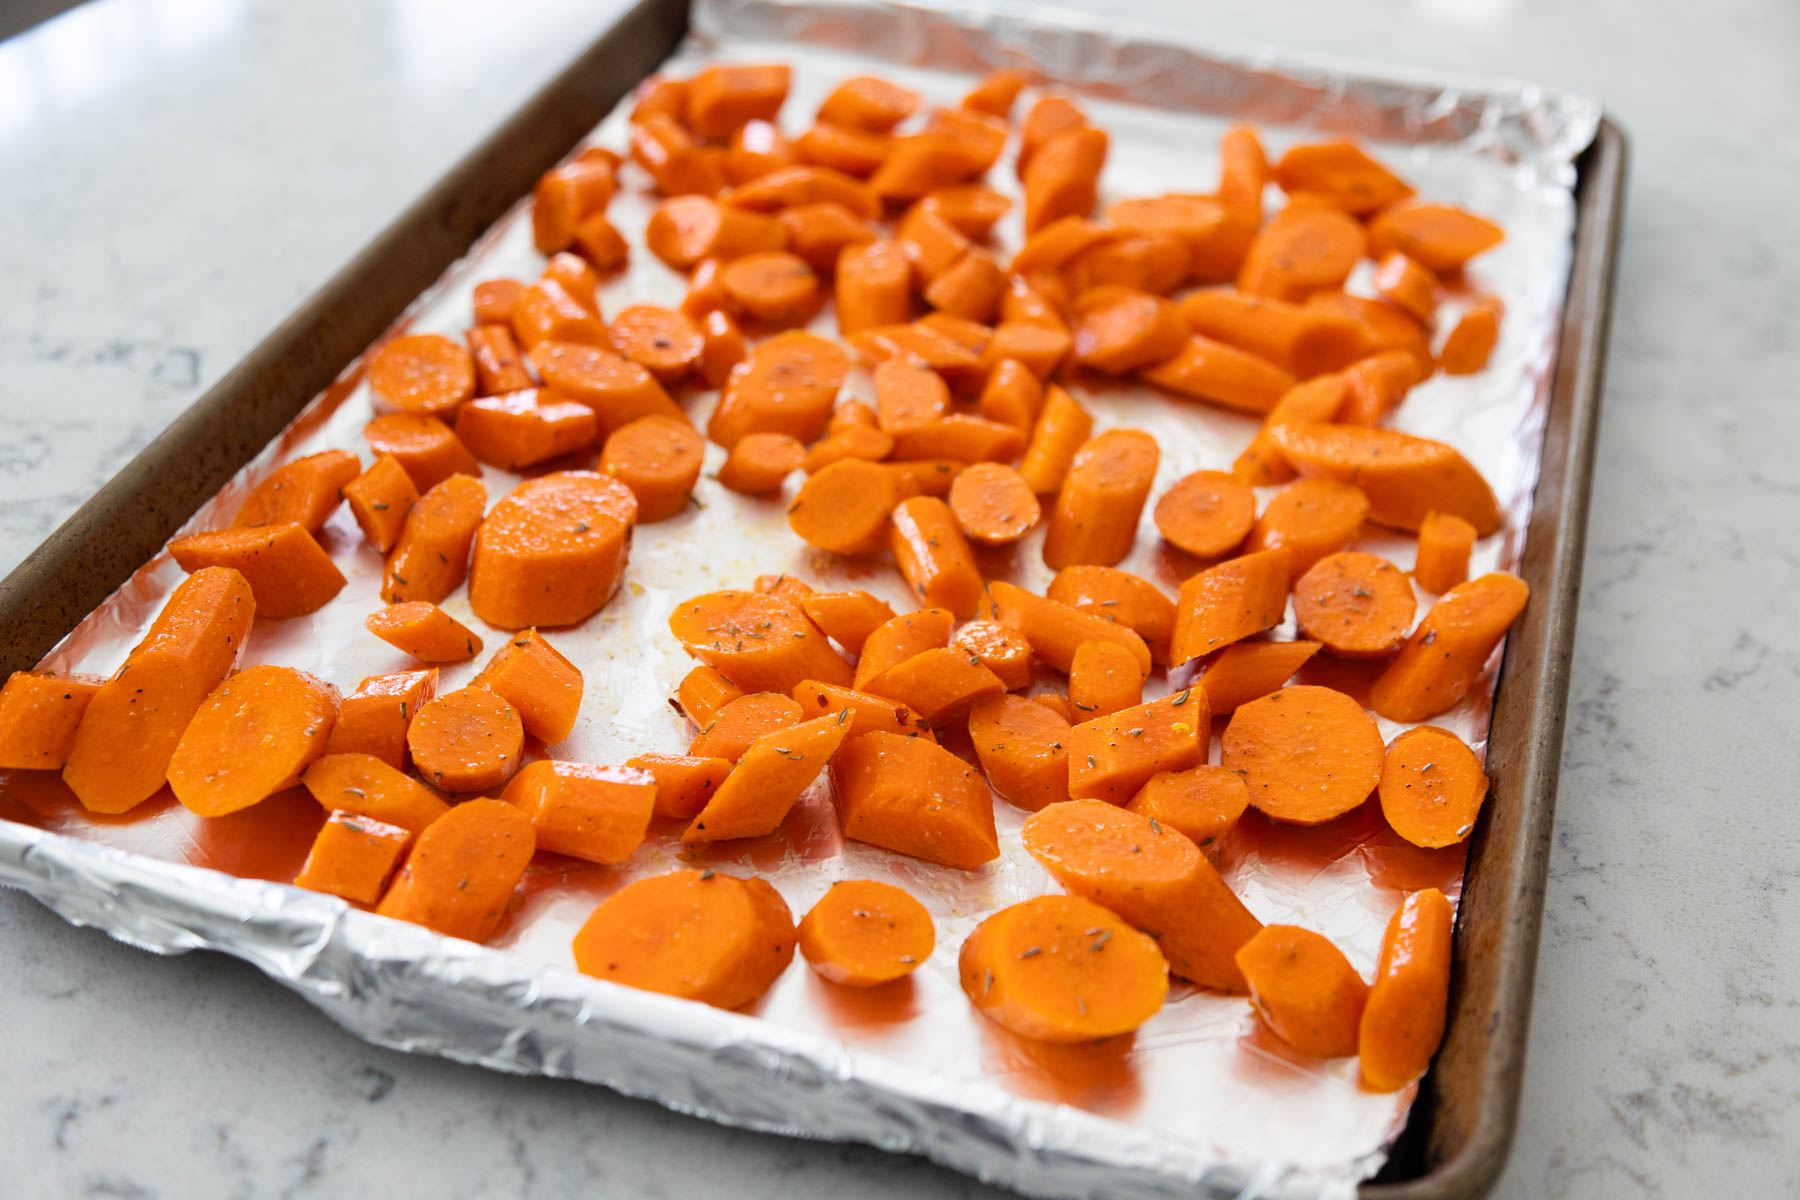 The carrots are on a large baking sheet and tossed with olive oil.